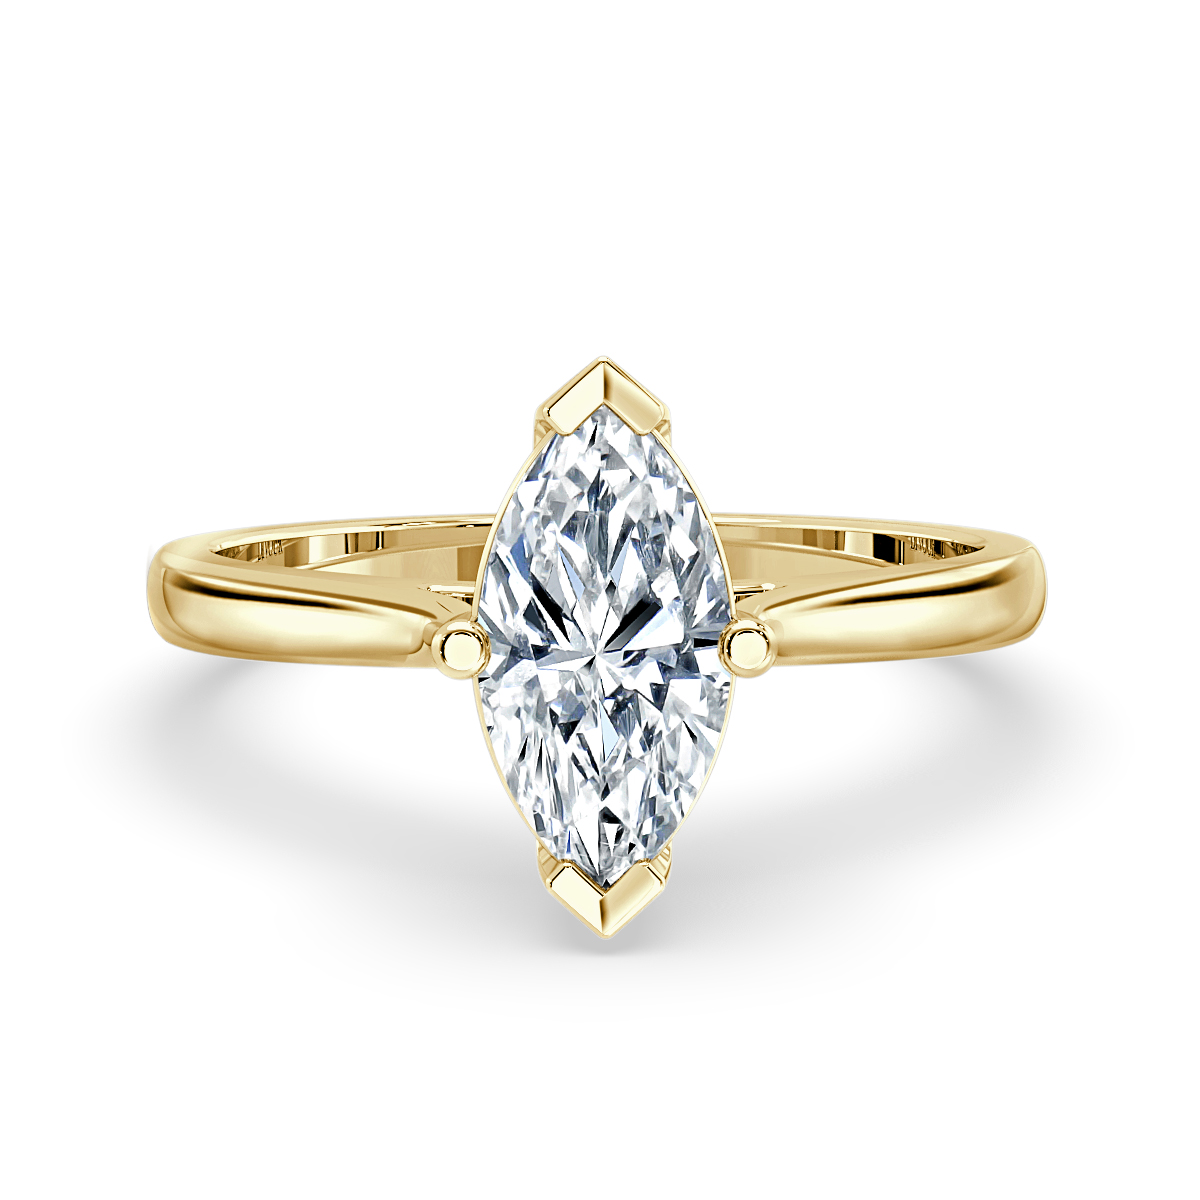 Diamond Solitaire Rings in UK | Solitaire Engagement Rings for Women